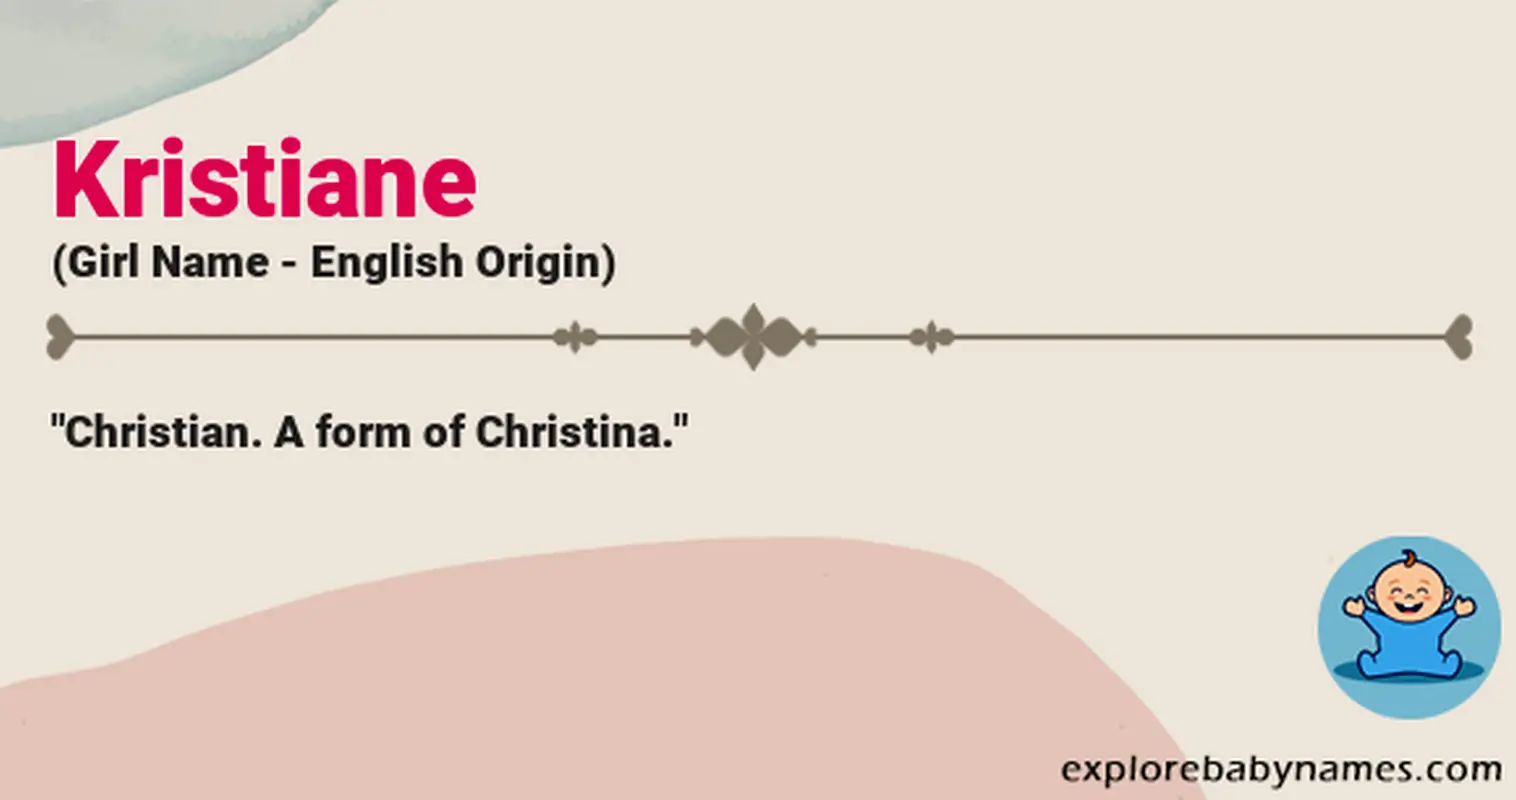 Meaning of Kristiane